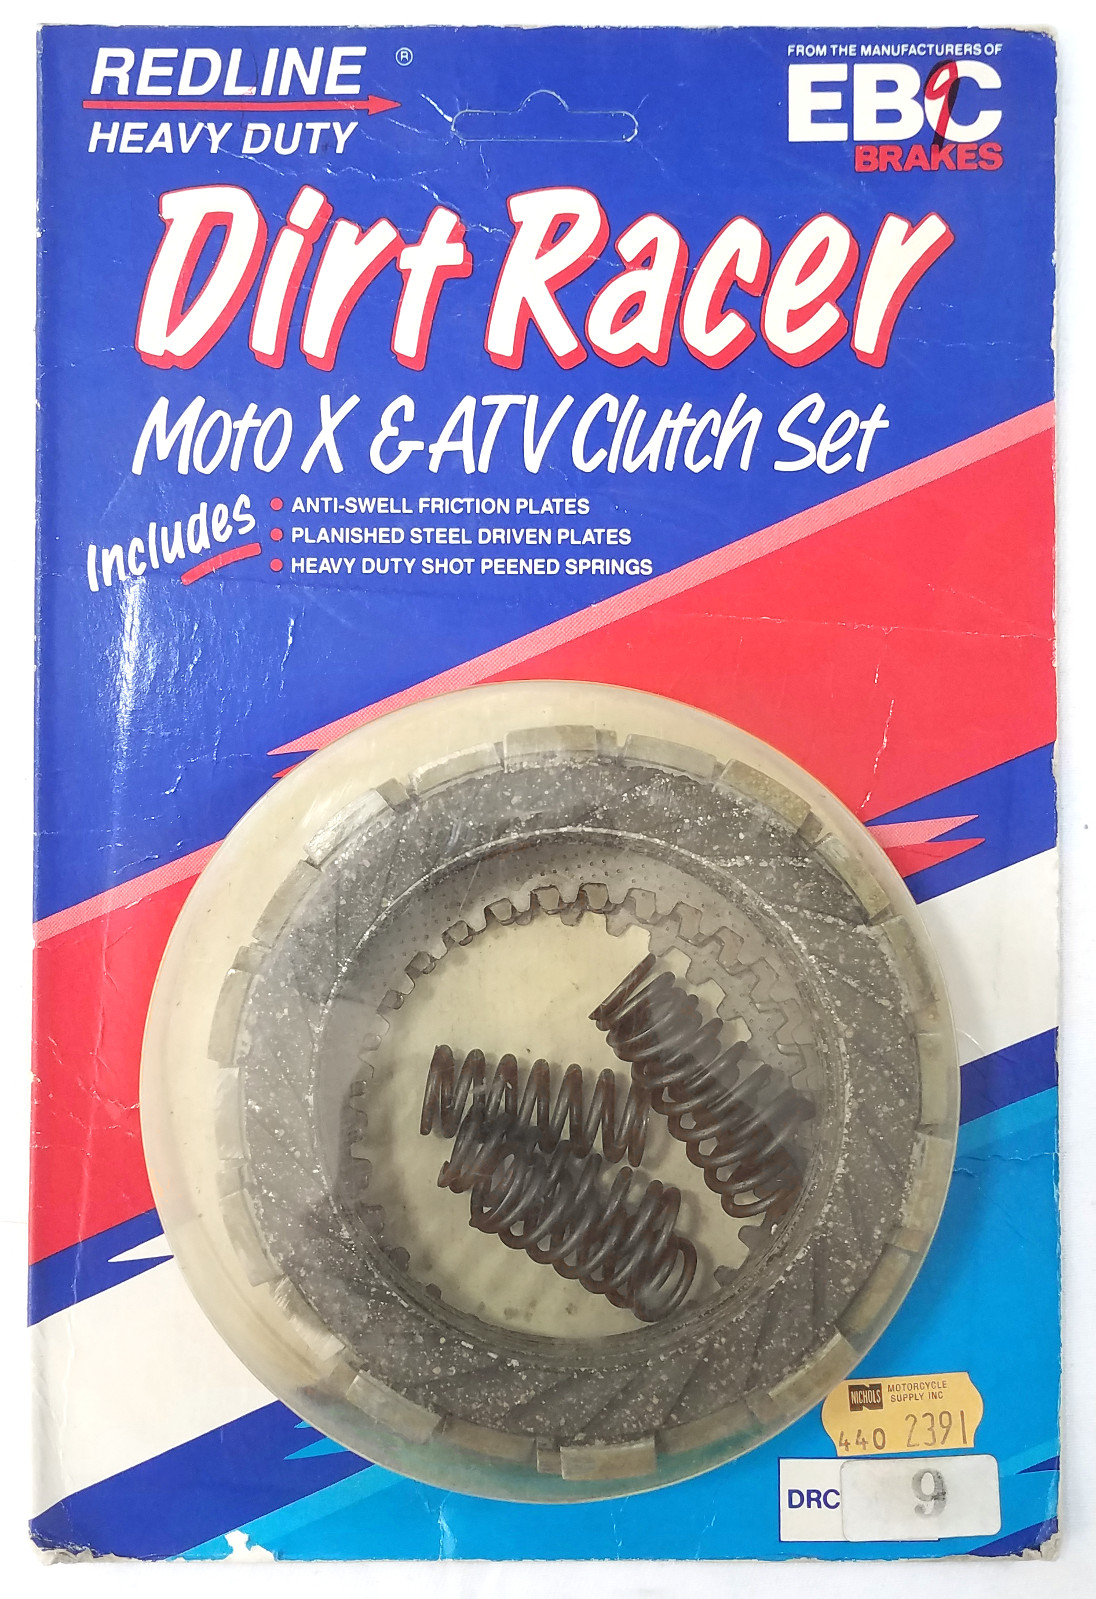 DRC Complete Clutch Kit - Cork CK Plates, Steels, & Springs - 1988 Kawasaki KX80 - Click Image to Close